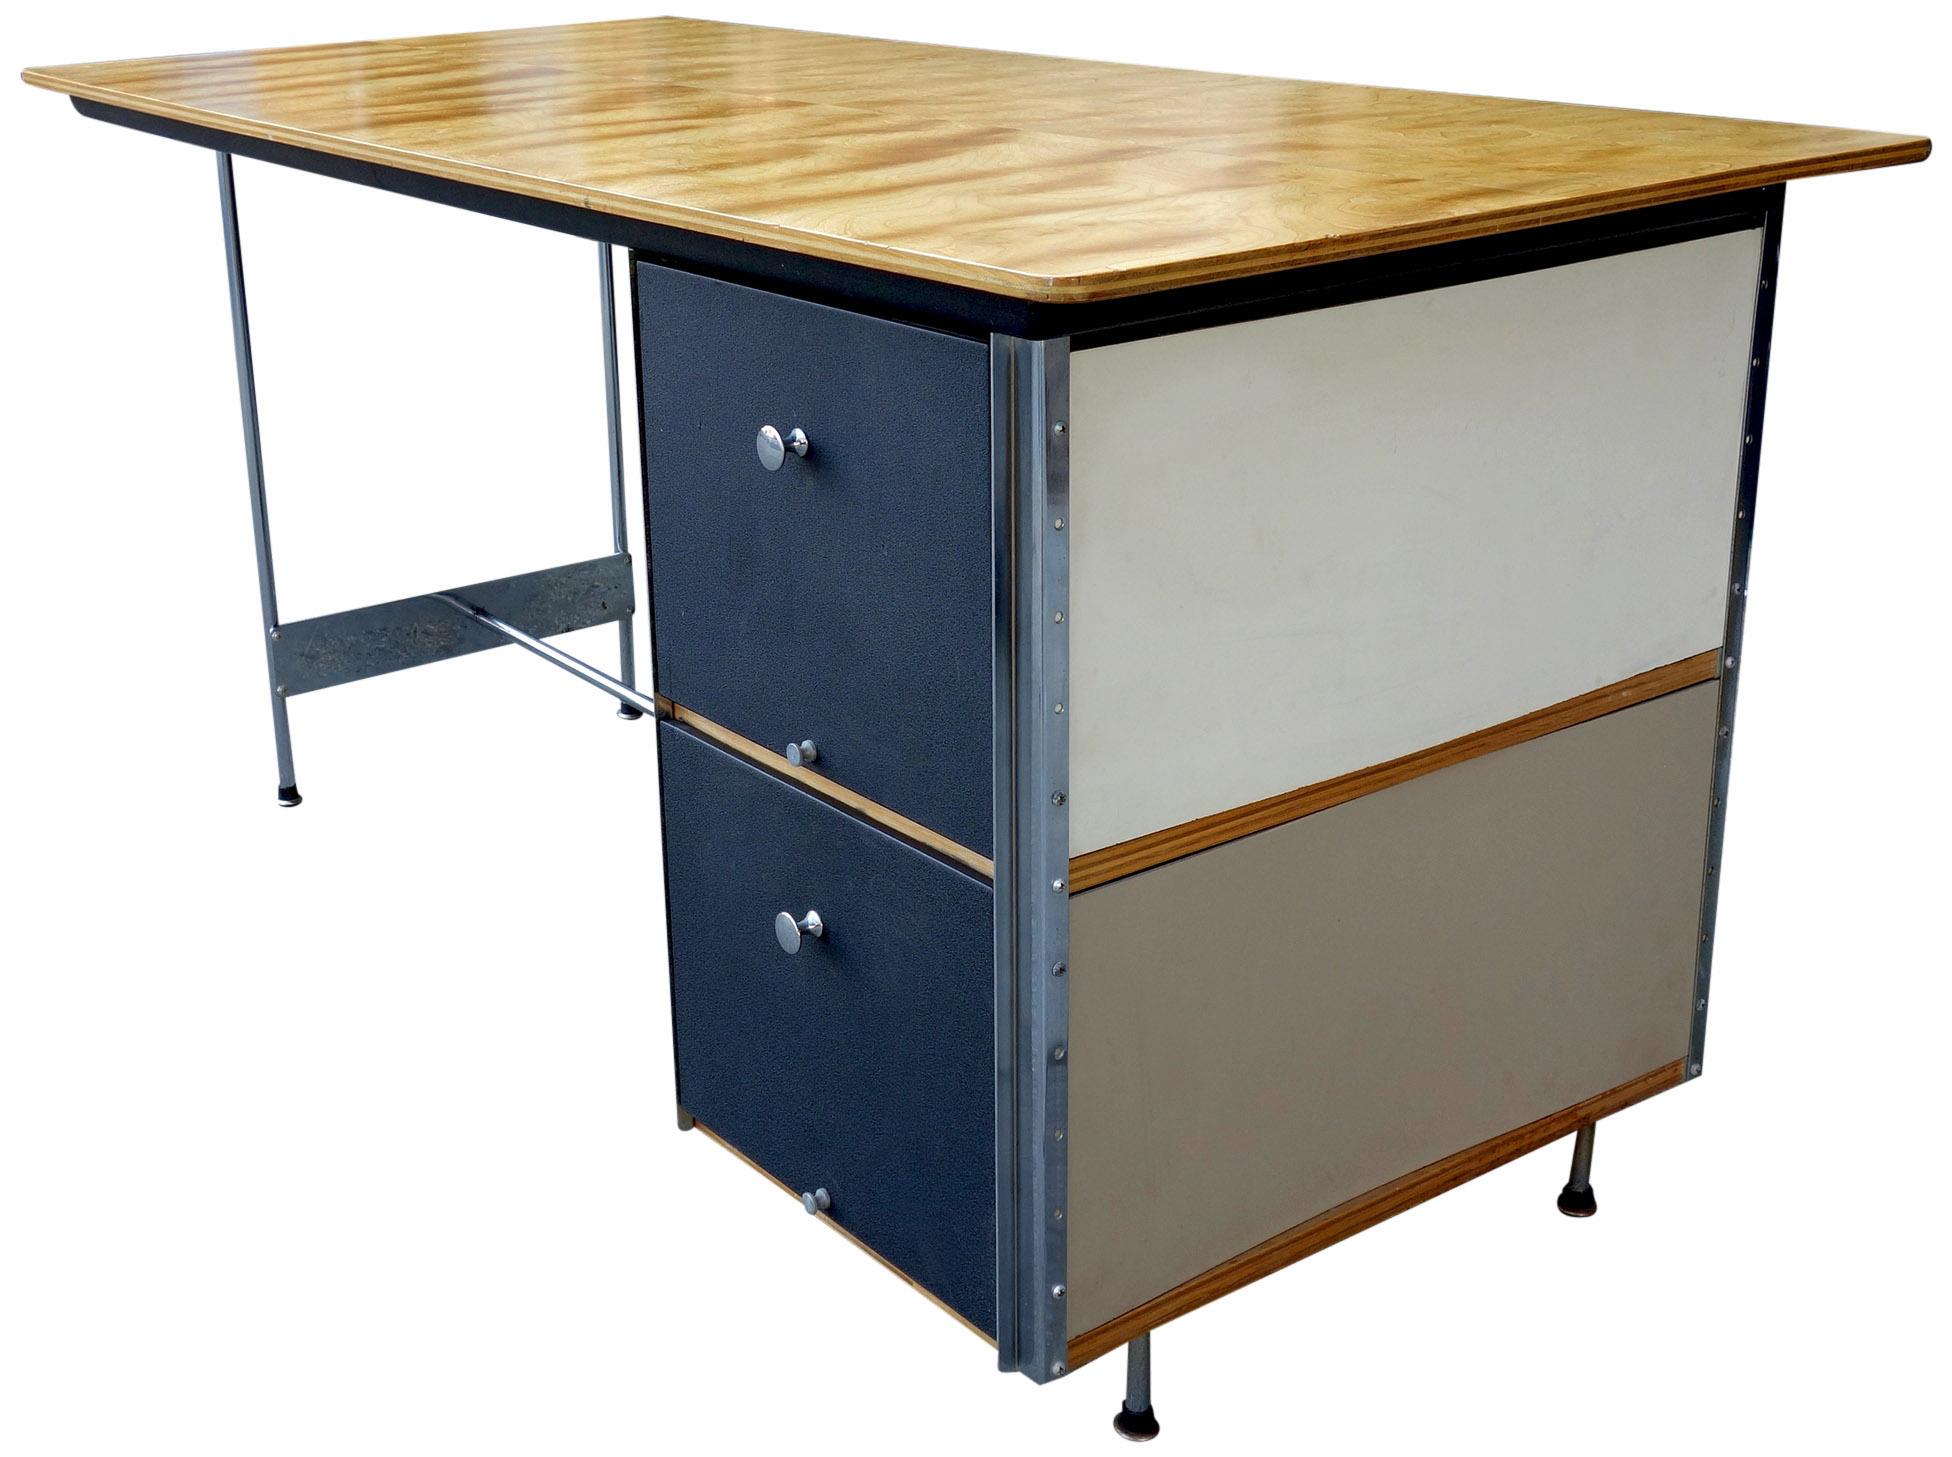 For your consideration is this nicely preserved Eames Desk Unit (EDU) part of the ESU series. This all original desk shows honest and little for its age. All drawers function perfectly and the panels are very clean. Slight pitting to the chrome